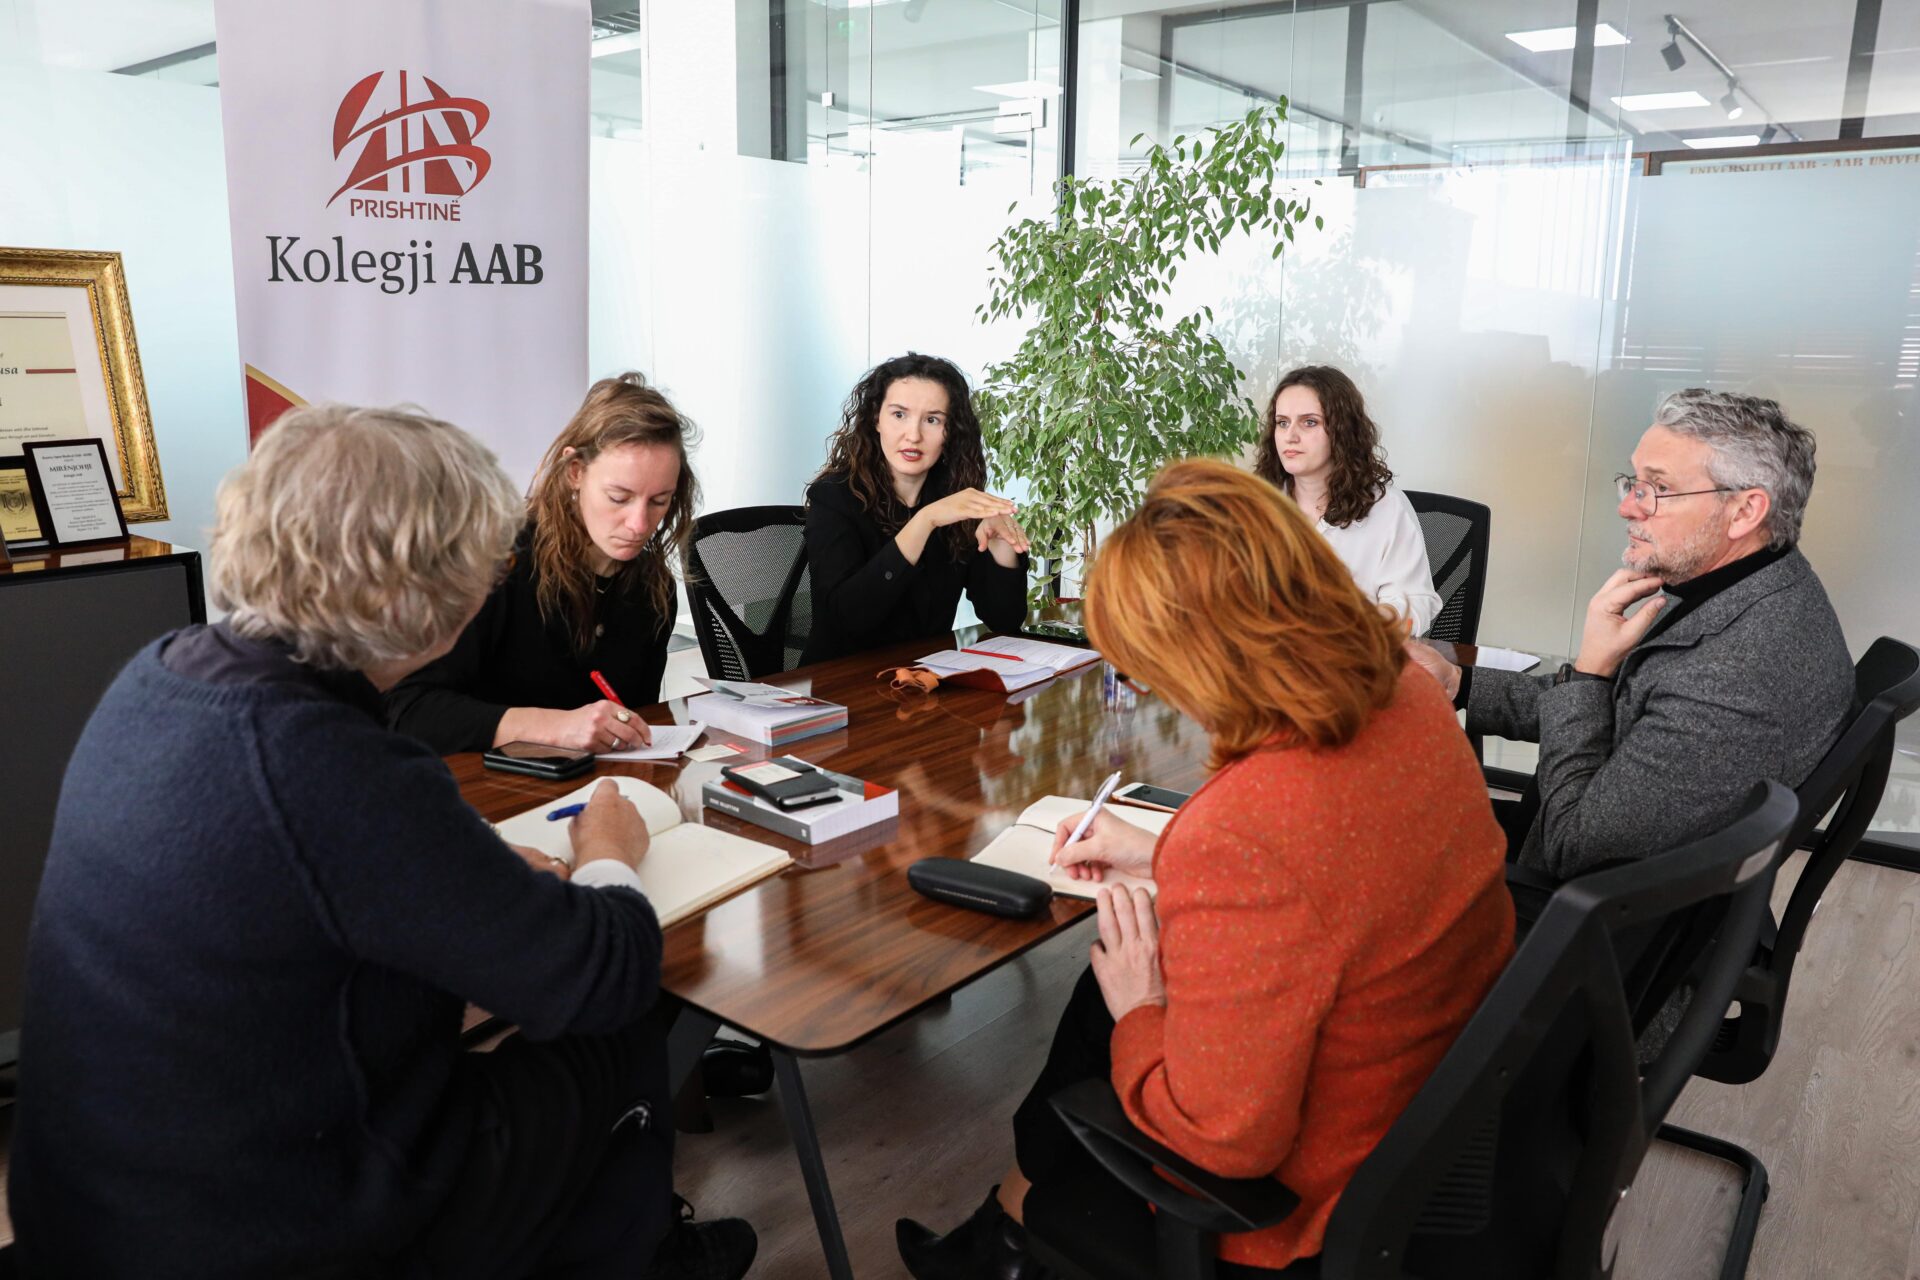 Experts from the Netherlands in vocational education with a working visit to AAB College